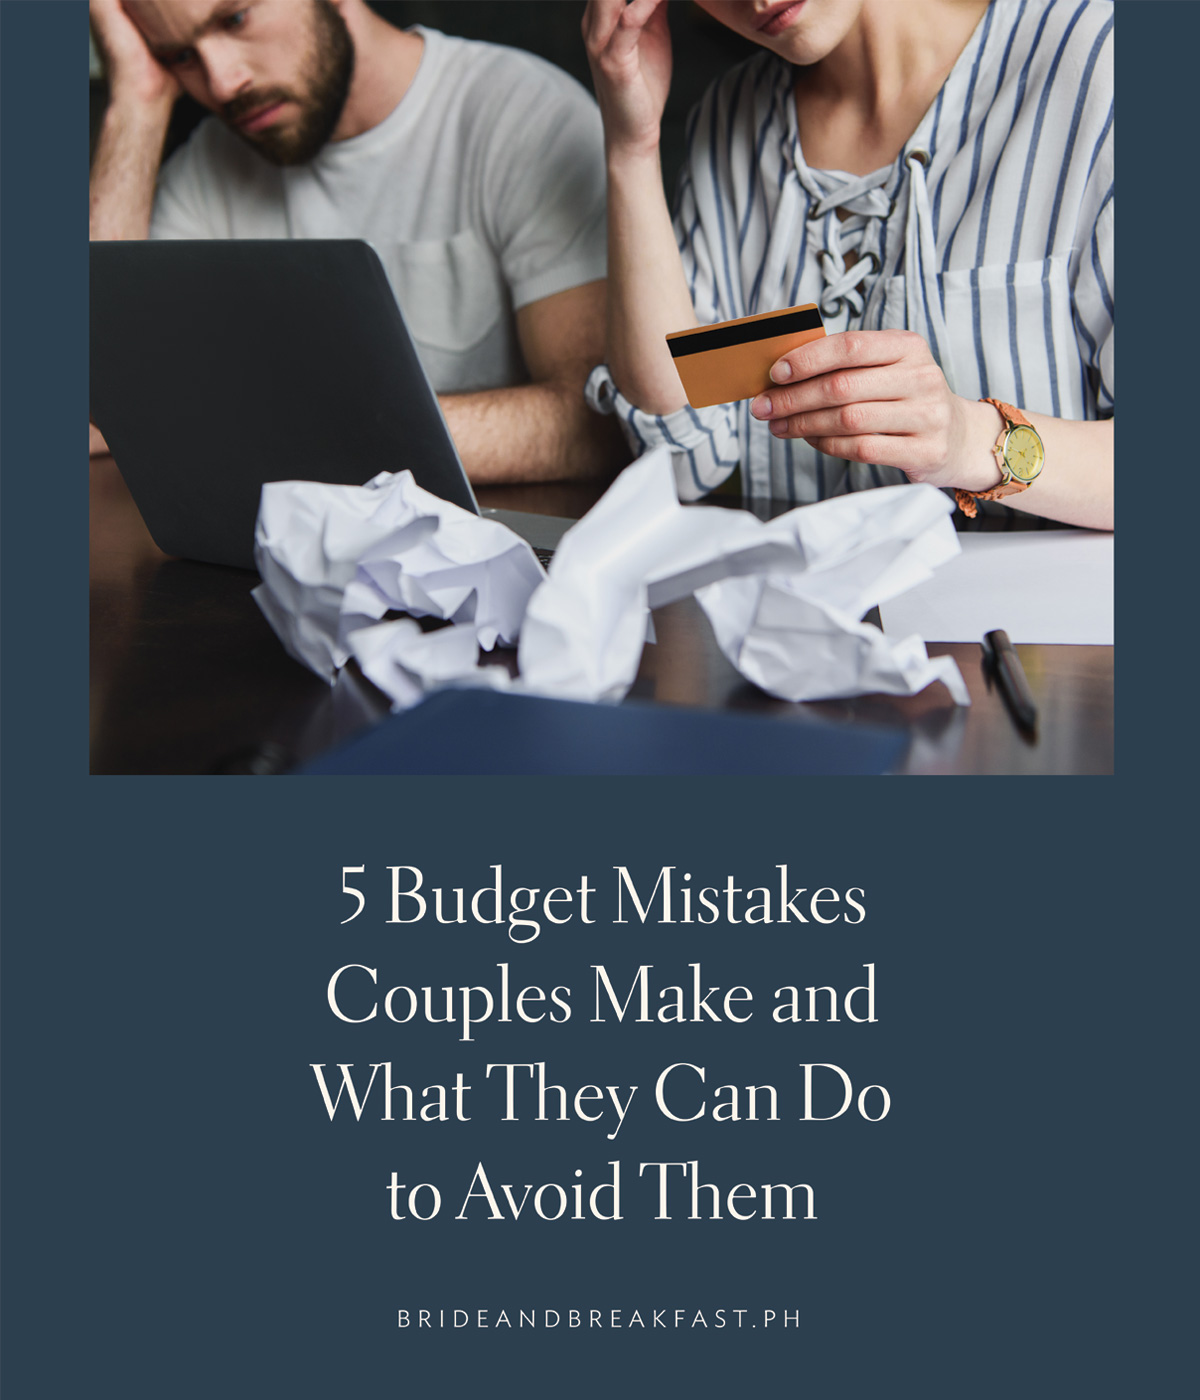 5 Budget Mistakes Couples Make and What They Can Do to Avoid Them